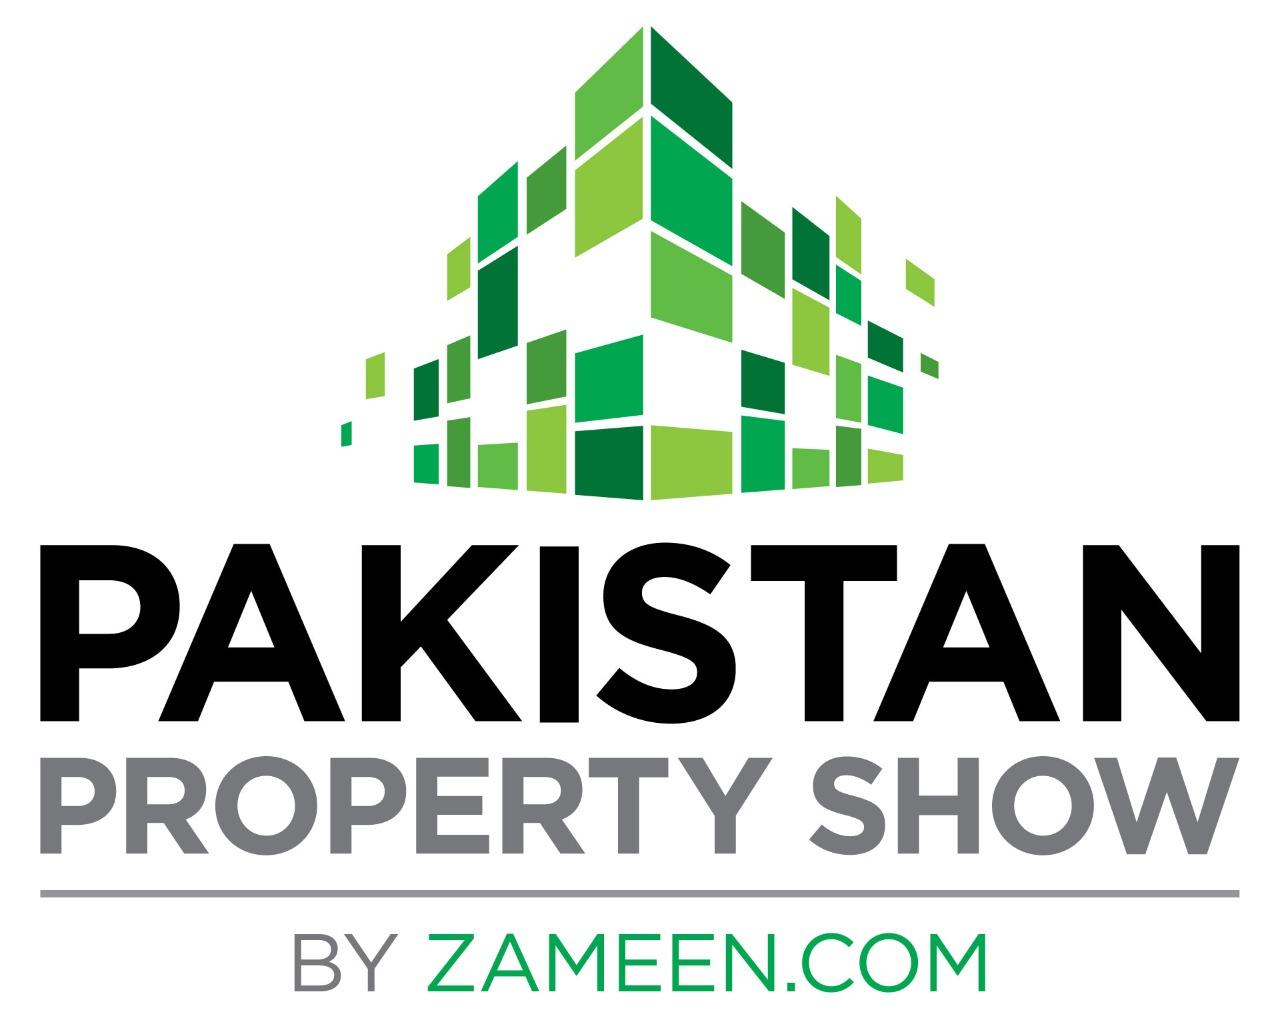 Zameen.com to hold Pakistan Property Show in Dubai on December 6, 7